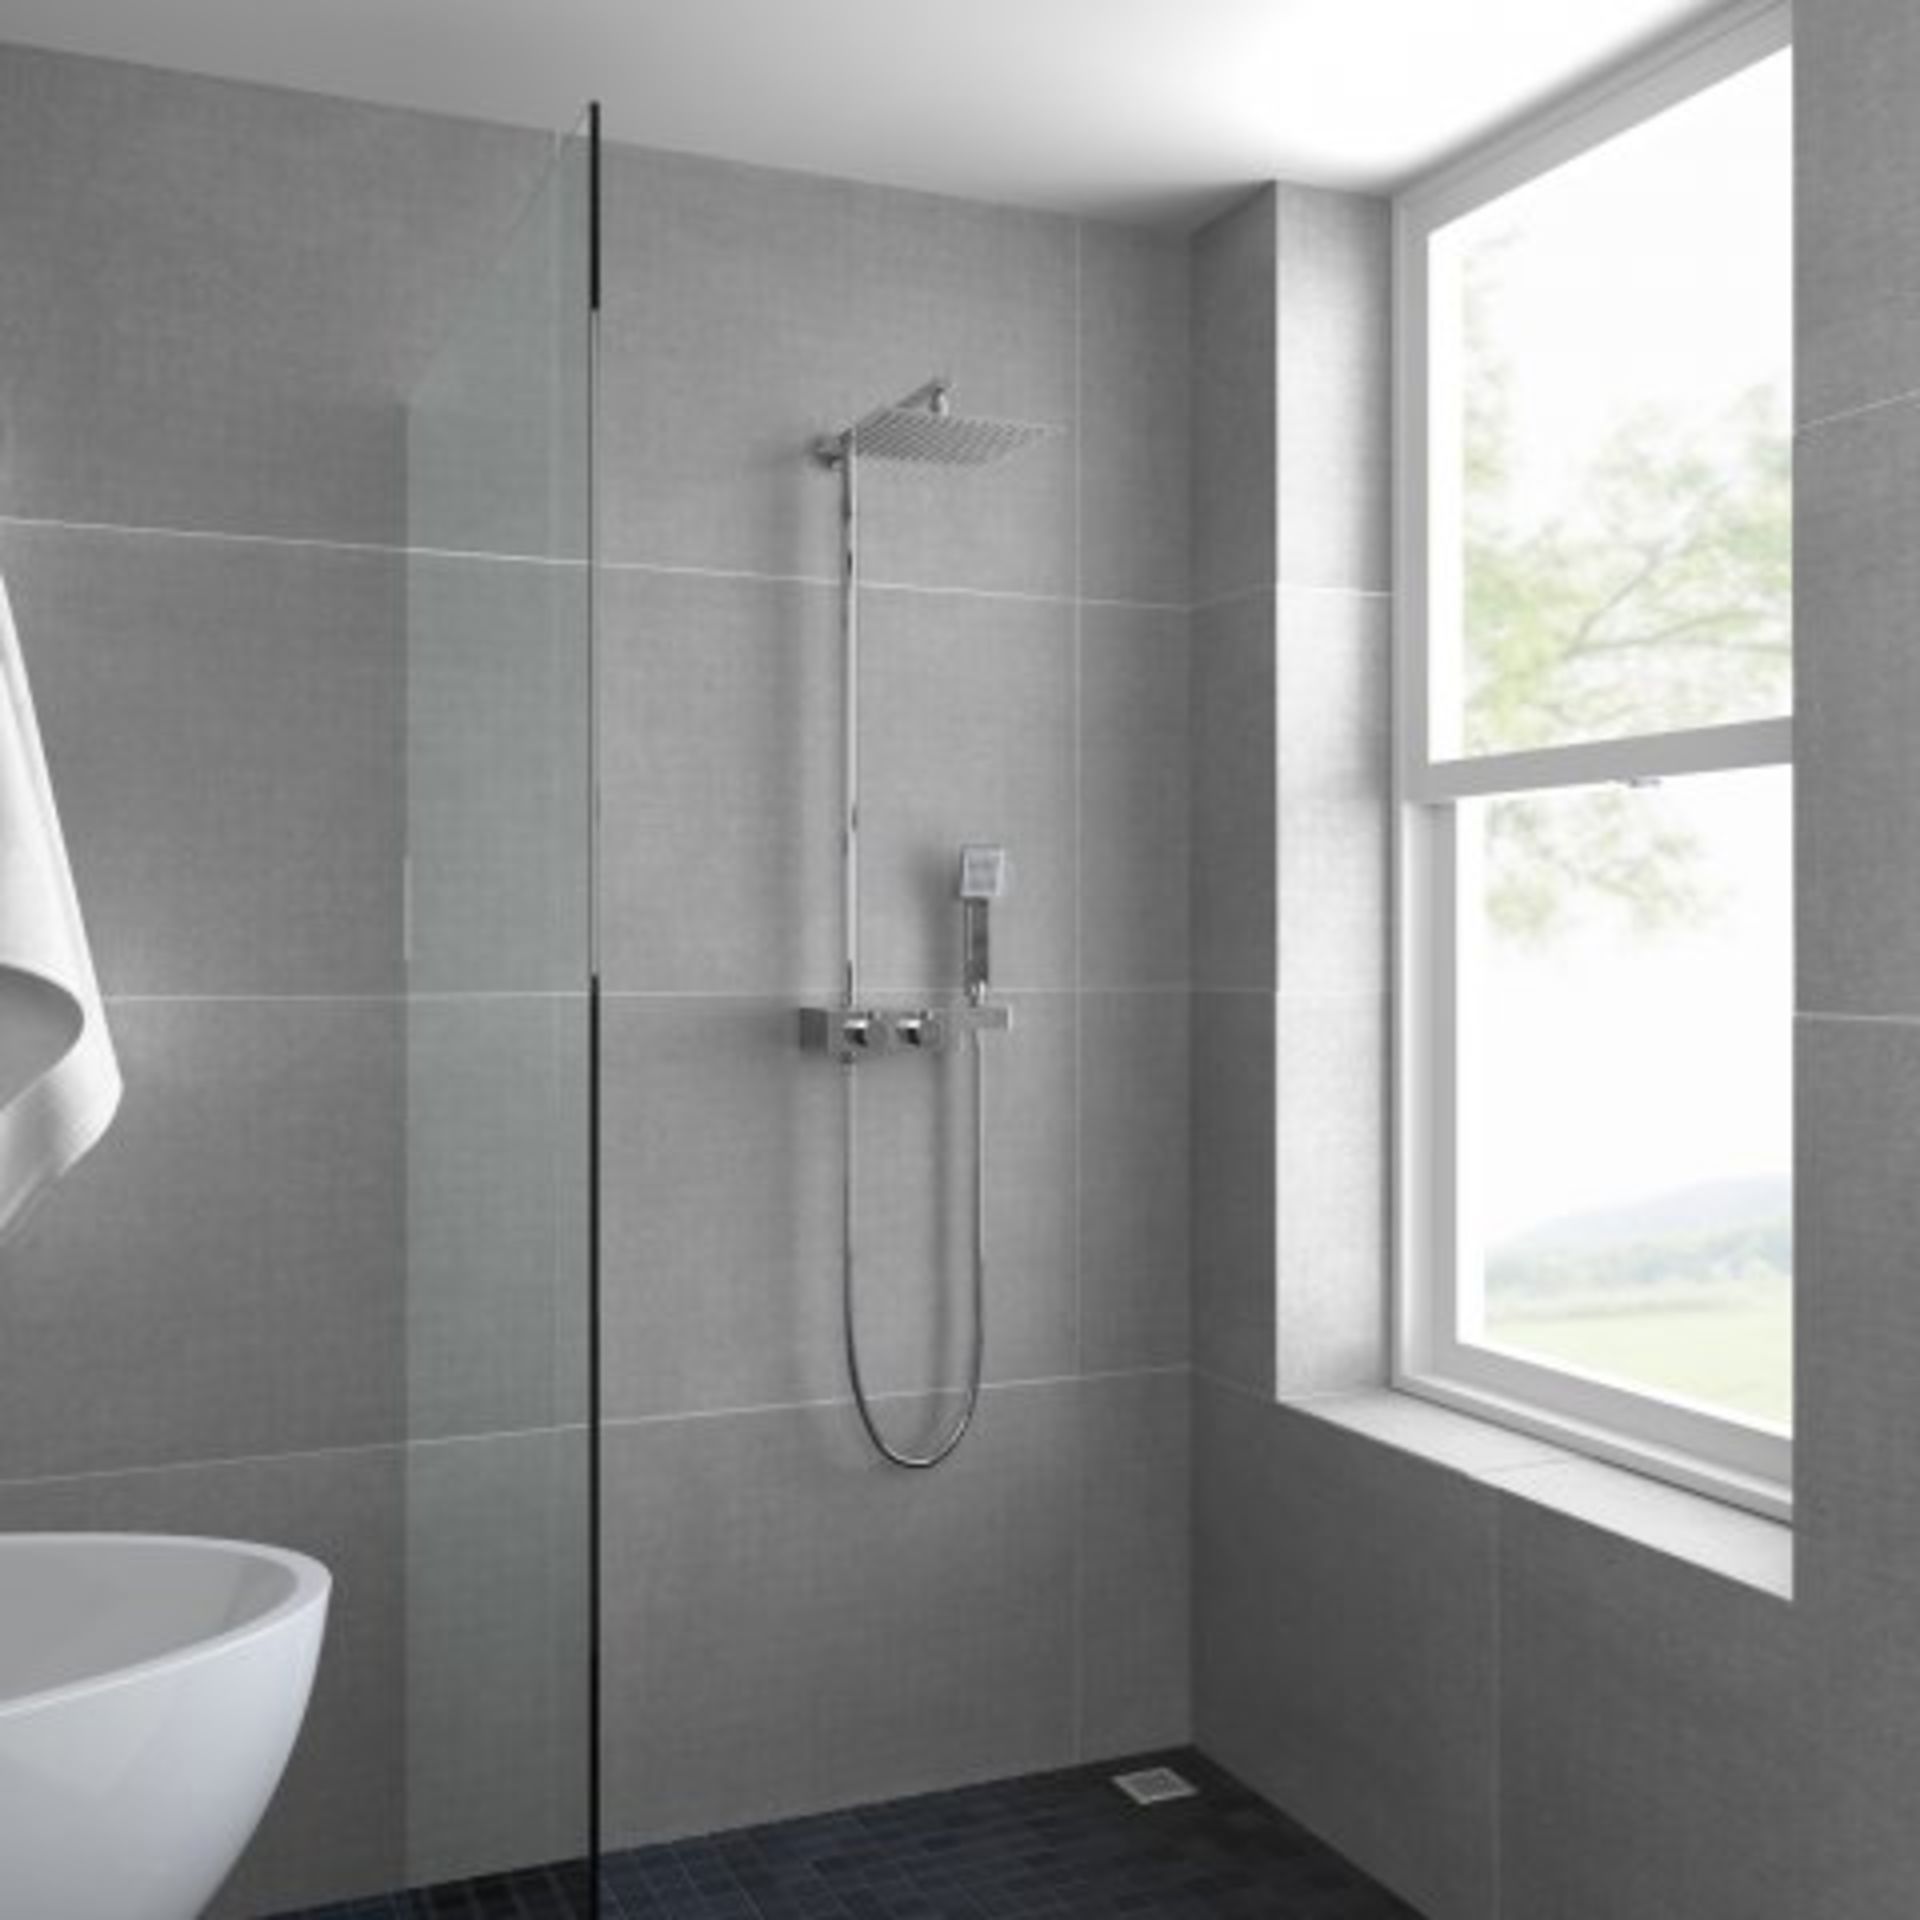 (N61) 250mm Large Square Head Thermostatic Exposed Shower Kit, Handheld & Storage Shelf. RRP £349. - Image 3 of 5